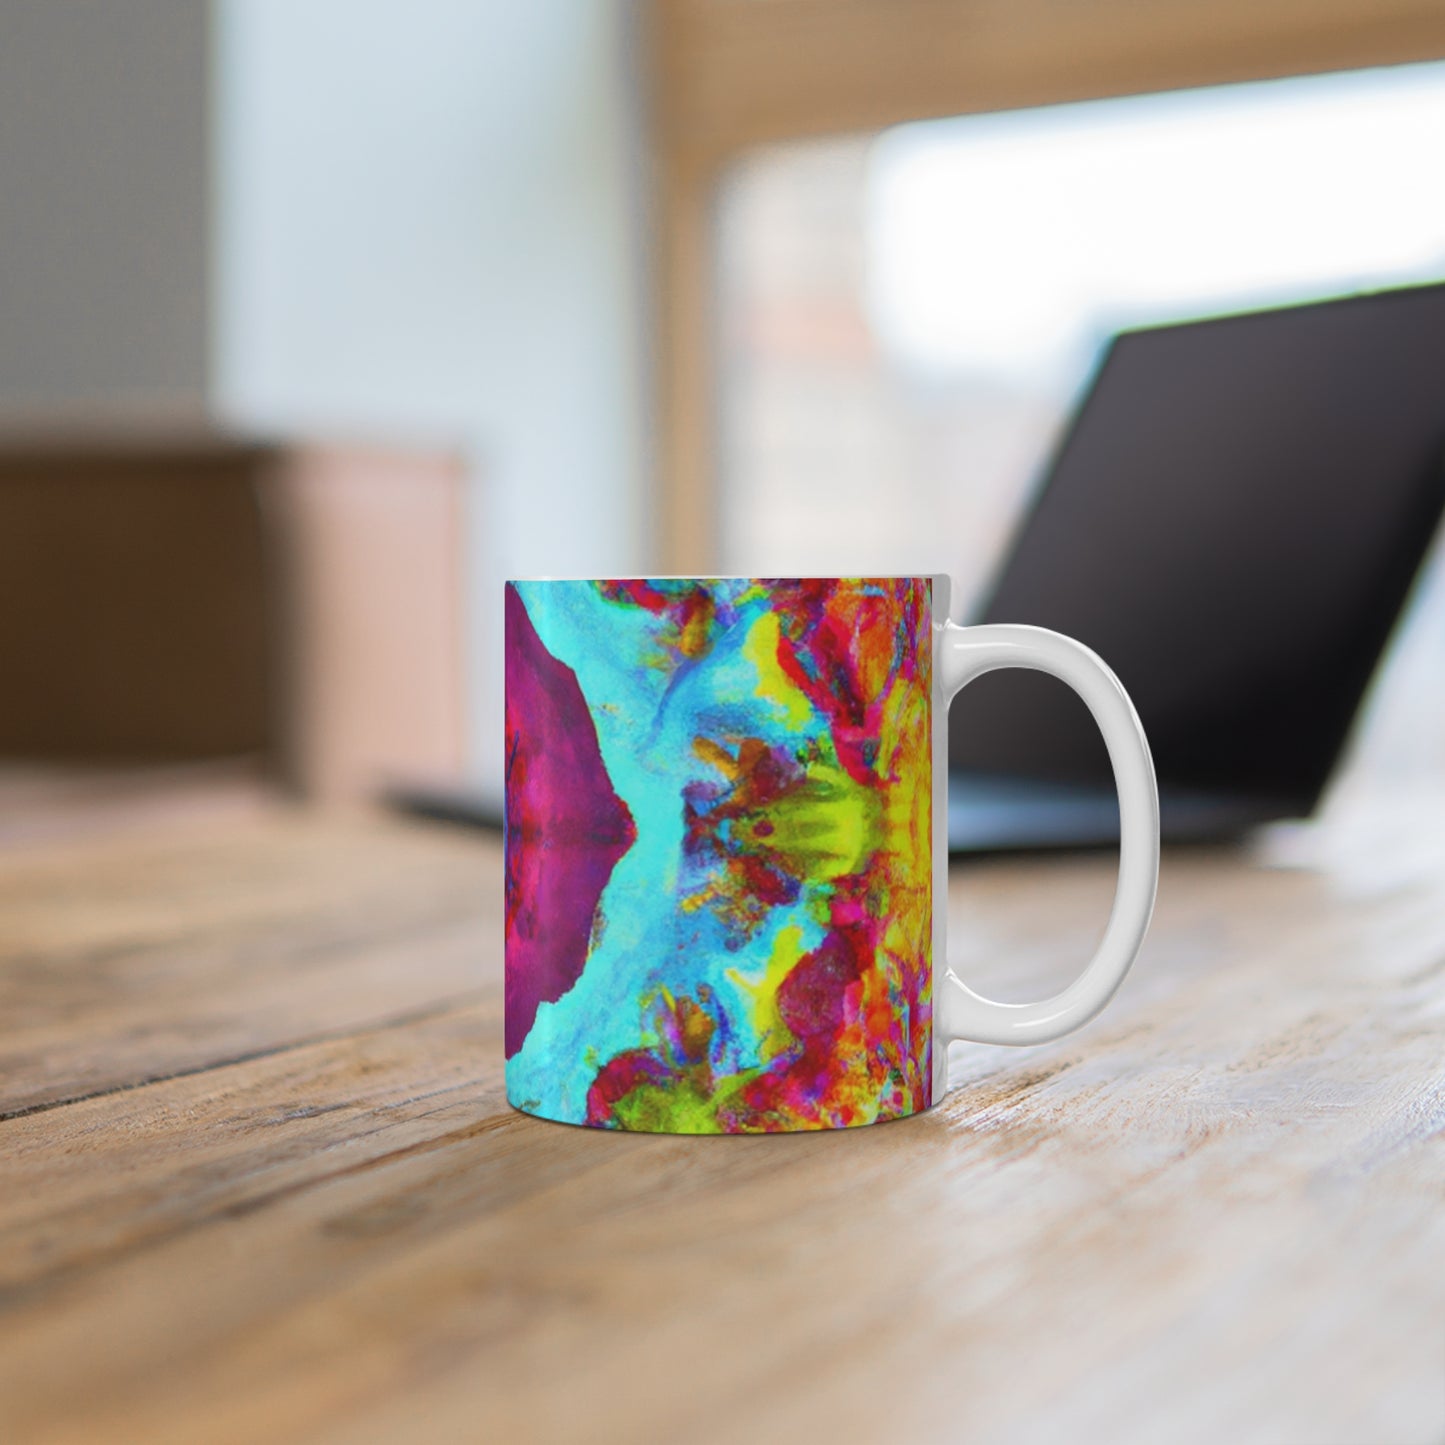 Jenny's Java - Psychedelic Coffee Cup Mug 11 Ounce